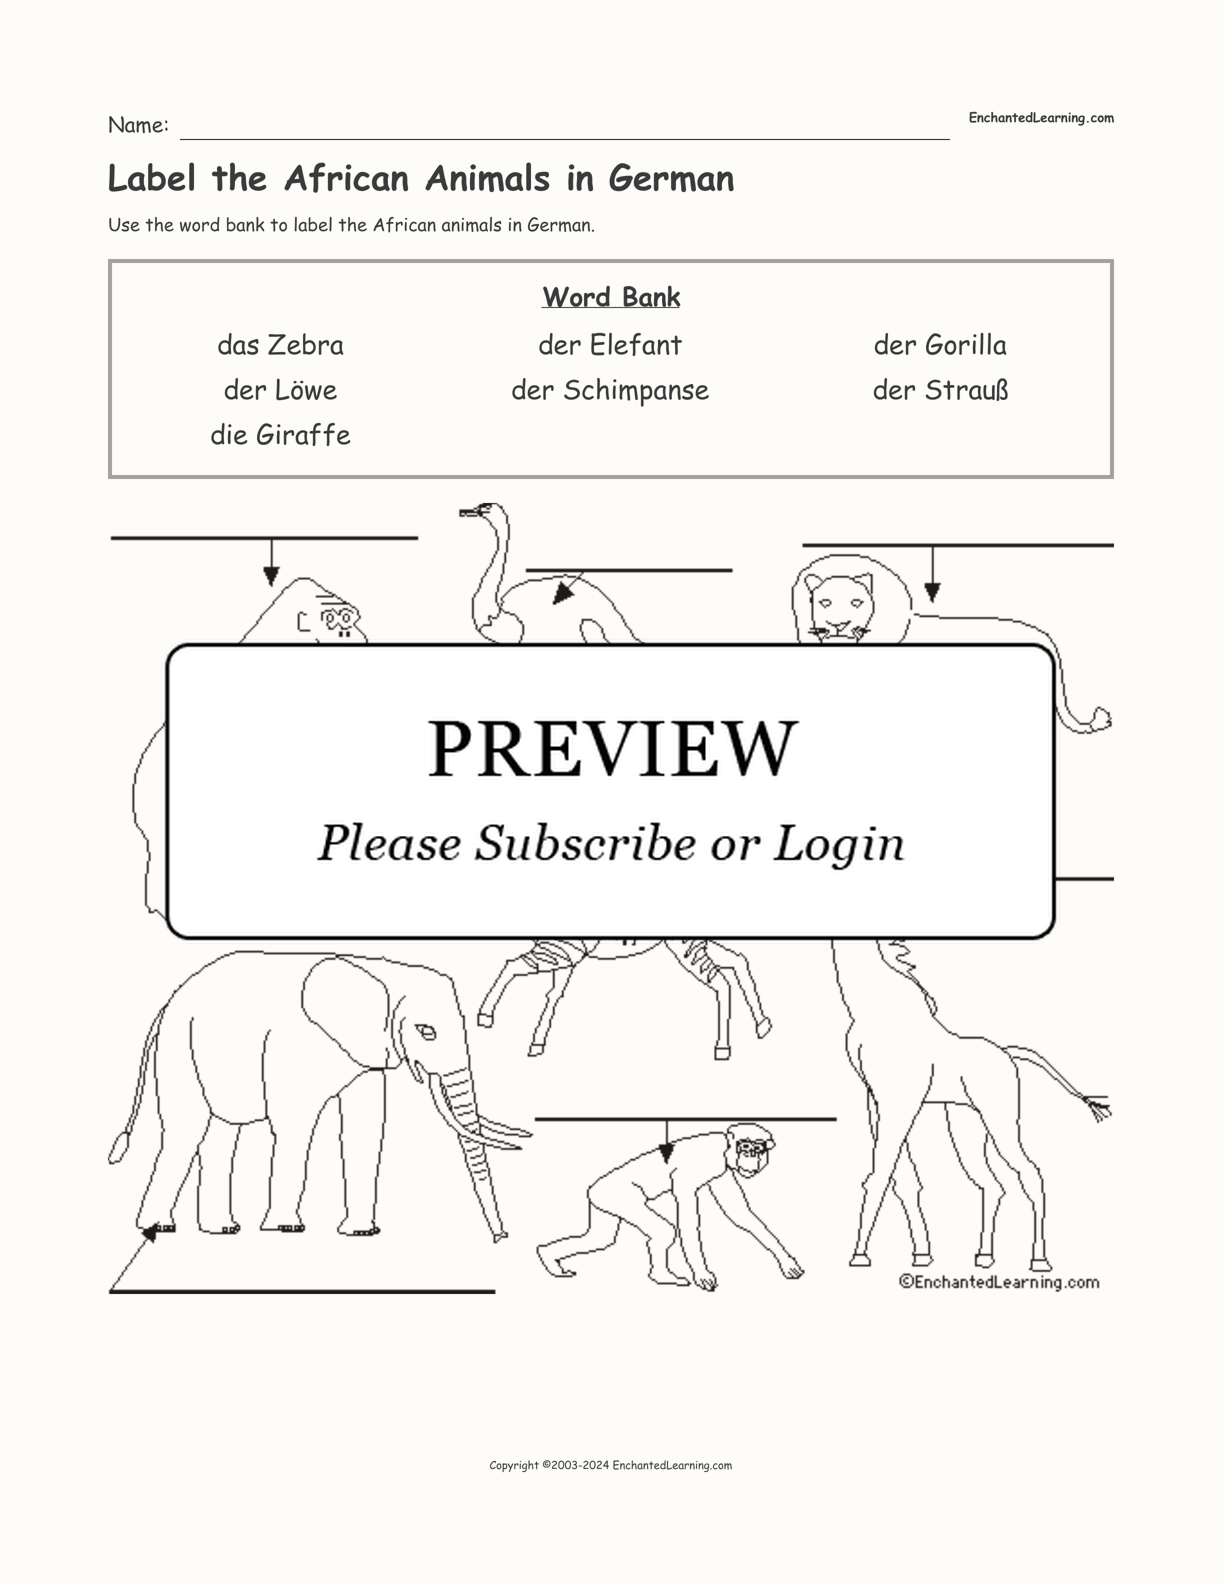 Label the African Animals in German interactive worksheet page 1